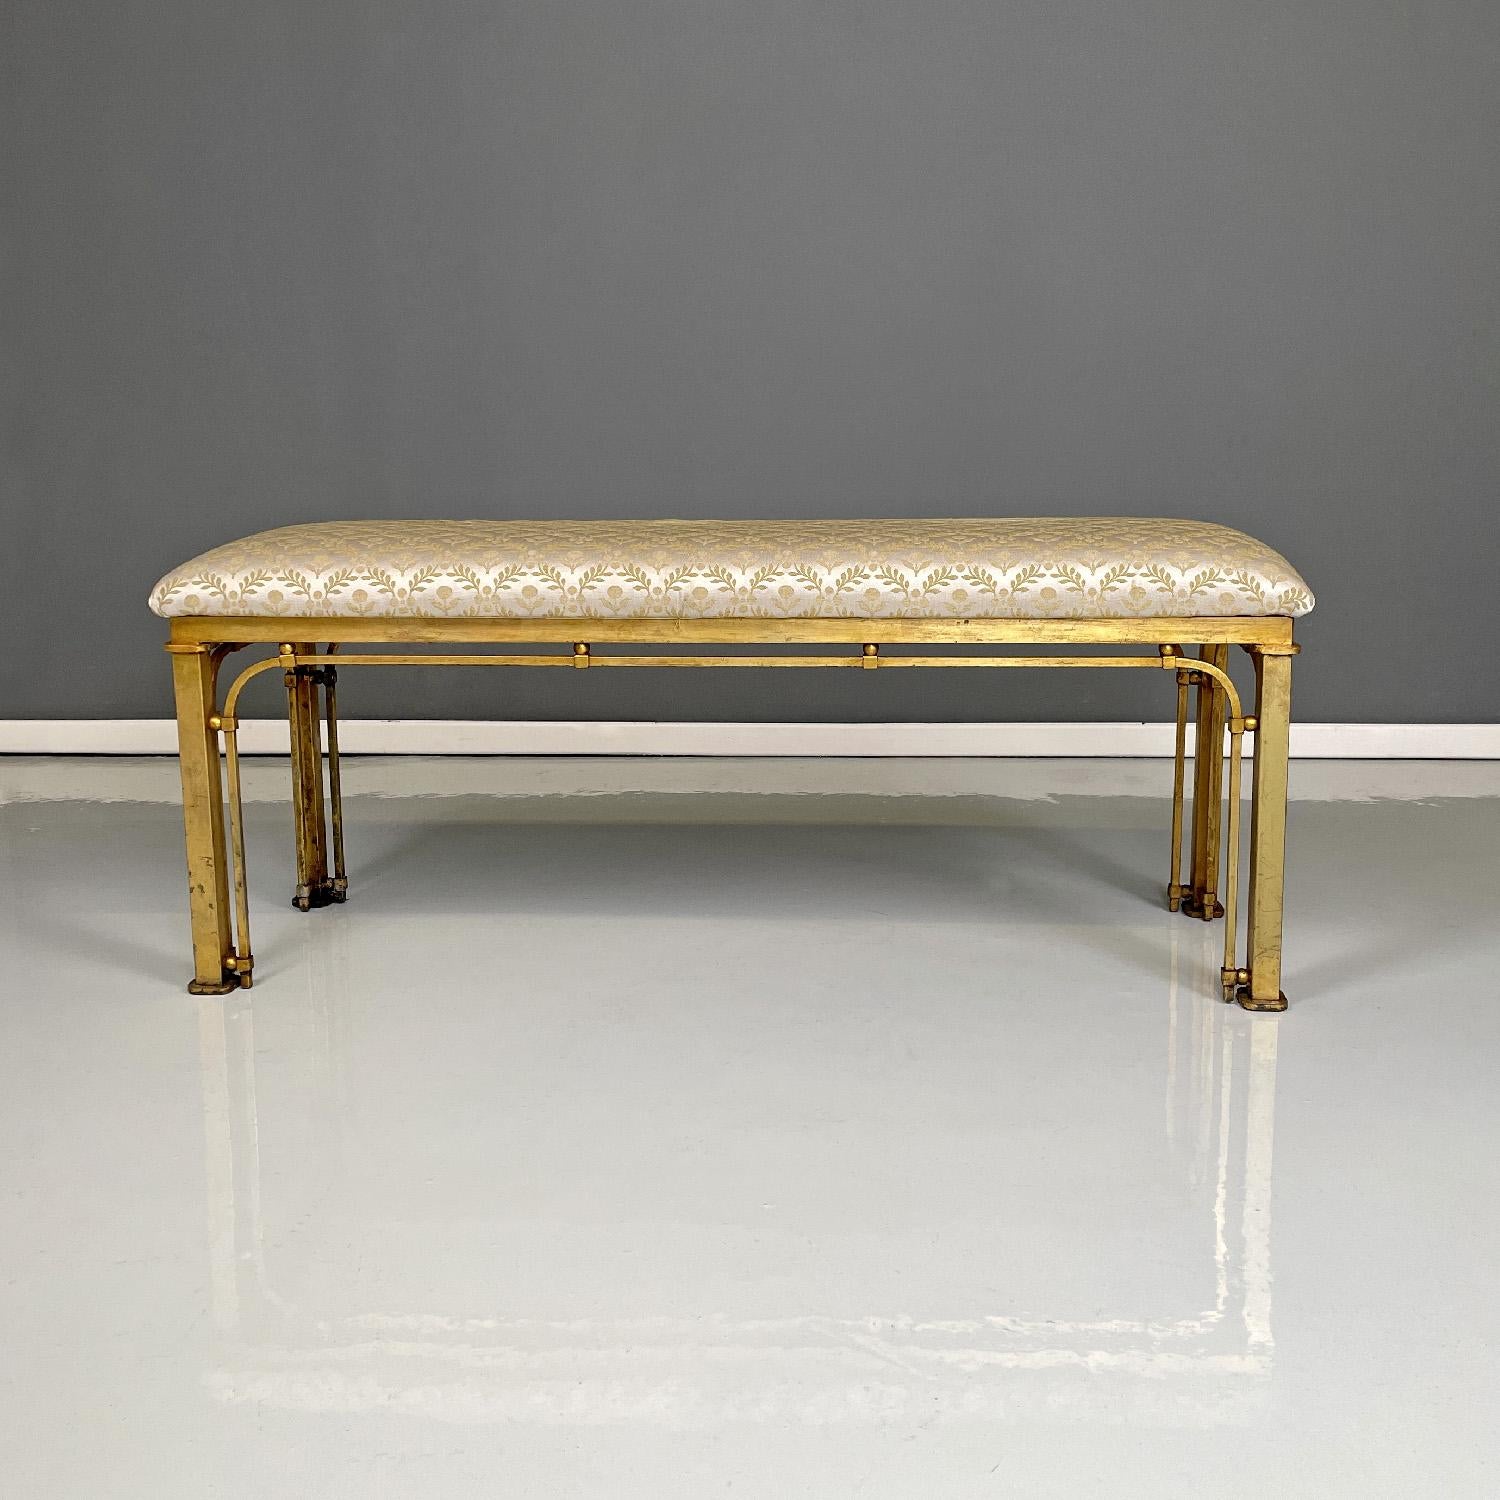 Italian floral fabric footrest or bench with golden metal structure, 1980s
Rectangular bench or footstool. The seat is padded and covered in beige fabric with golden floral decorations. The structure has a square section and is in golden metal with